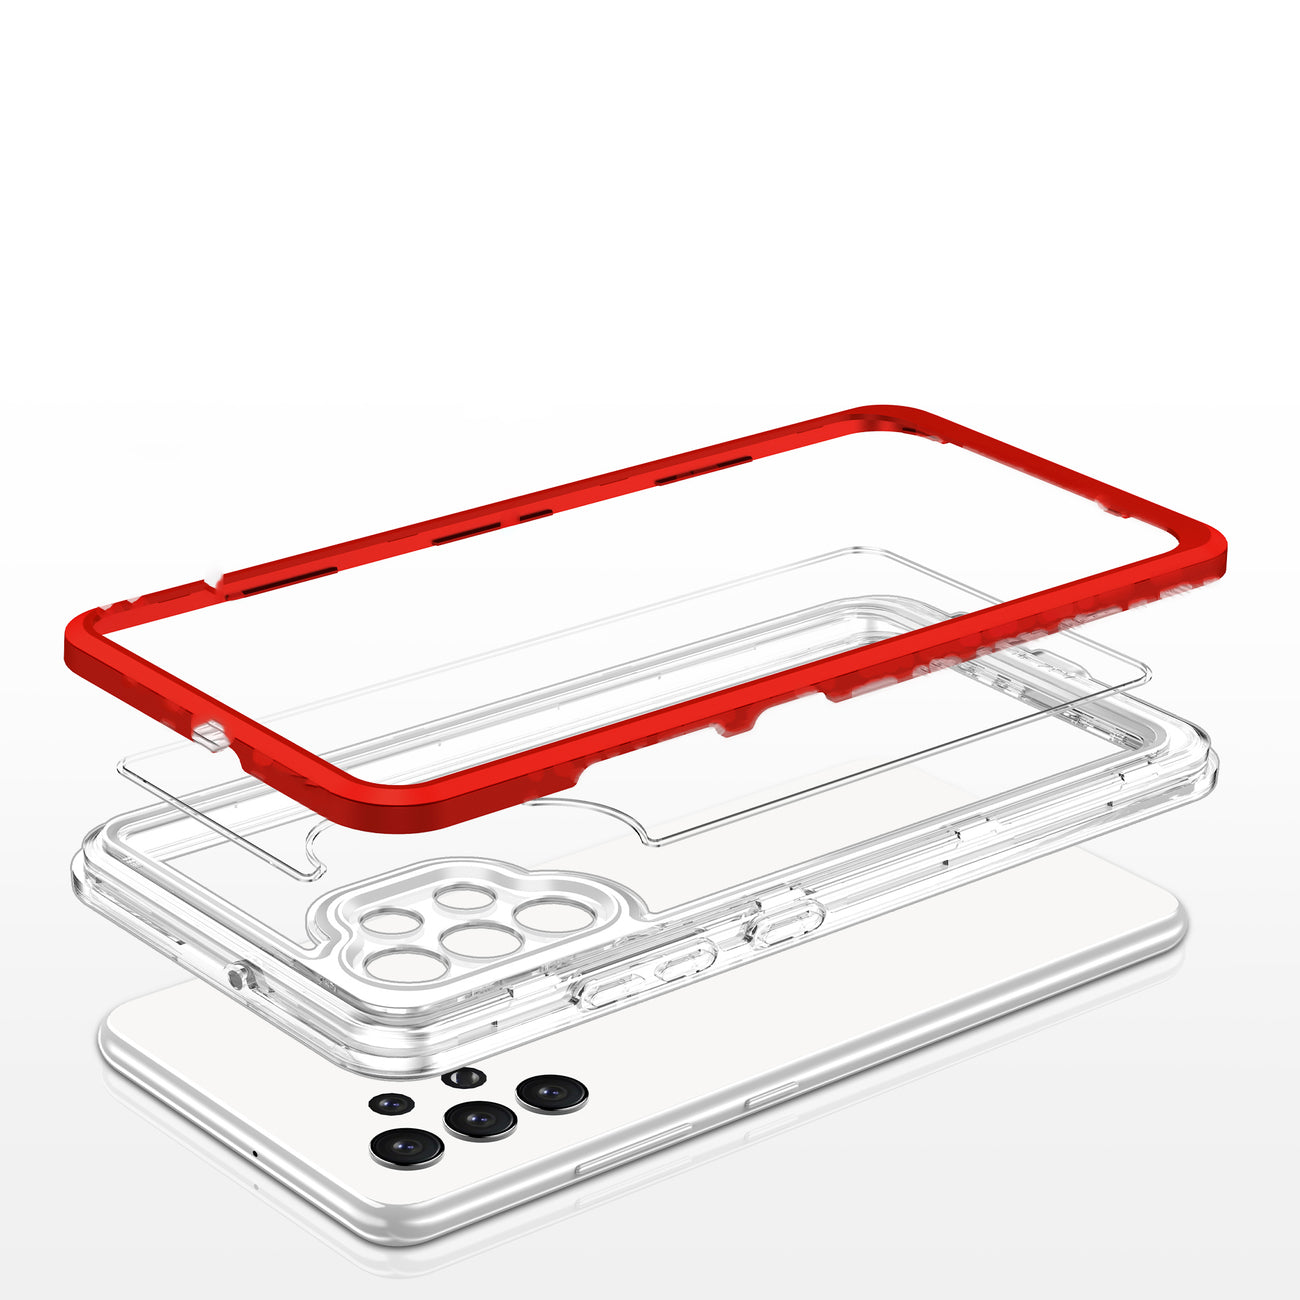 Clear 3in1 Case for Samsung Galaxy A32 5G Frame Gel Cover Red